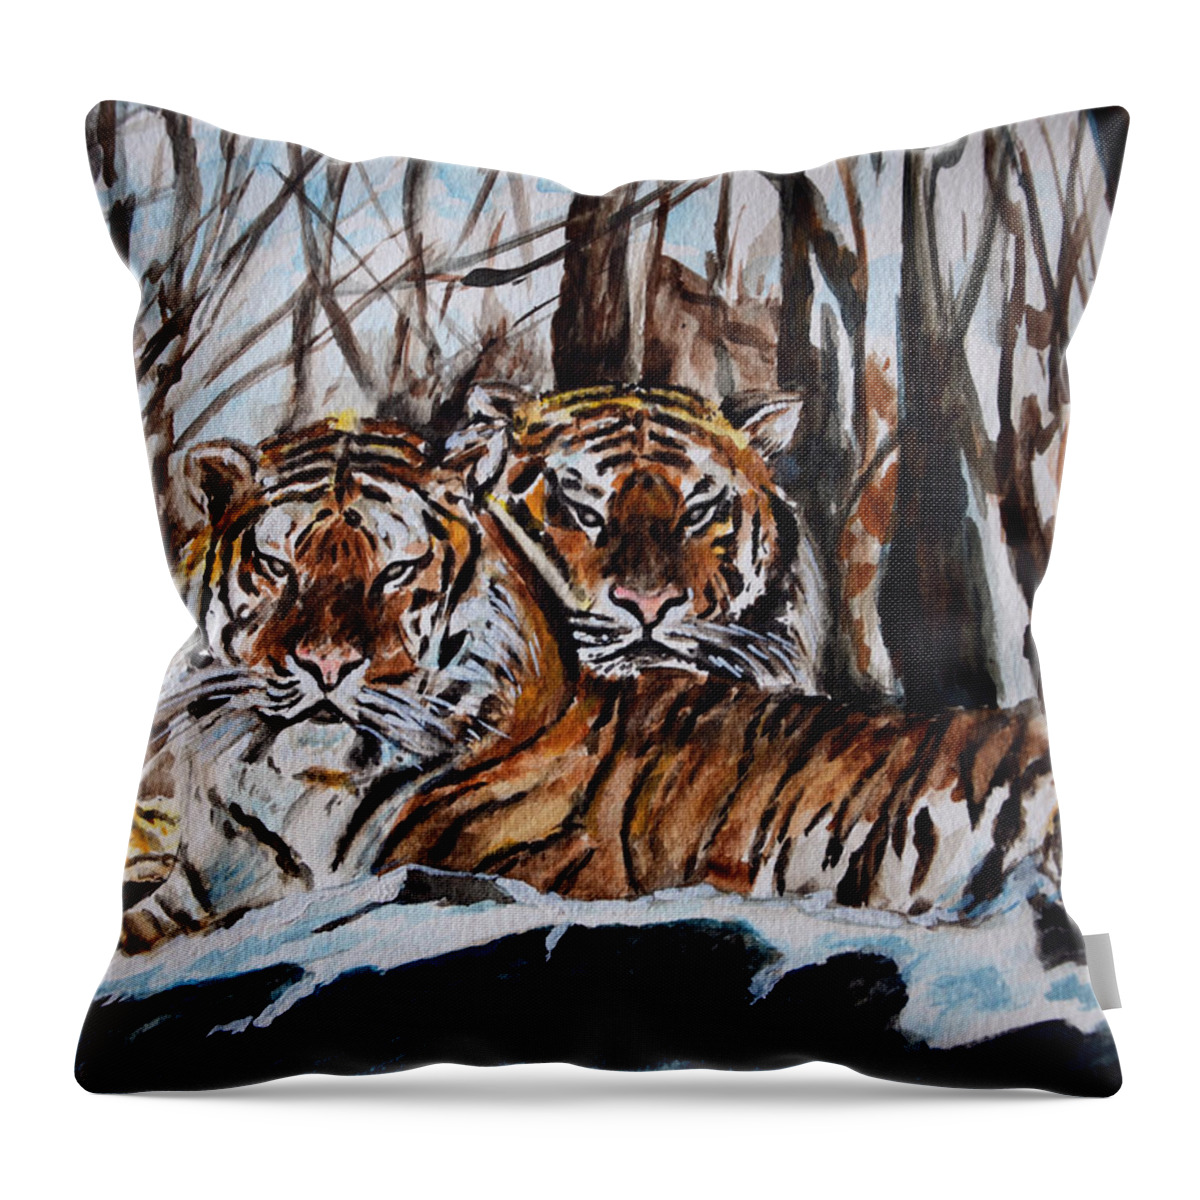 Tiger Throw Pillow featuring the painting Resting by Harsh Malik